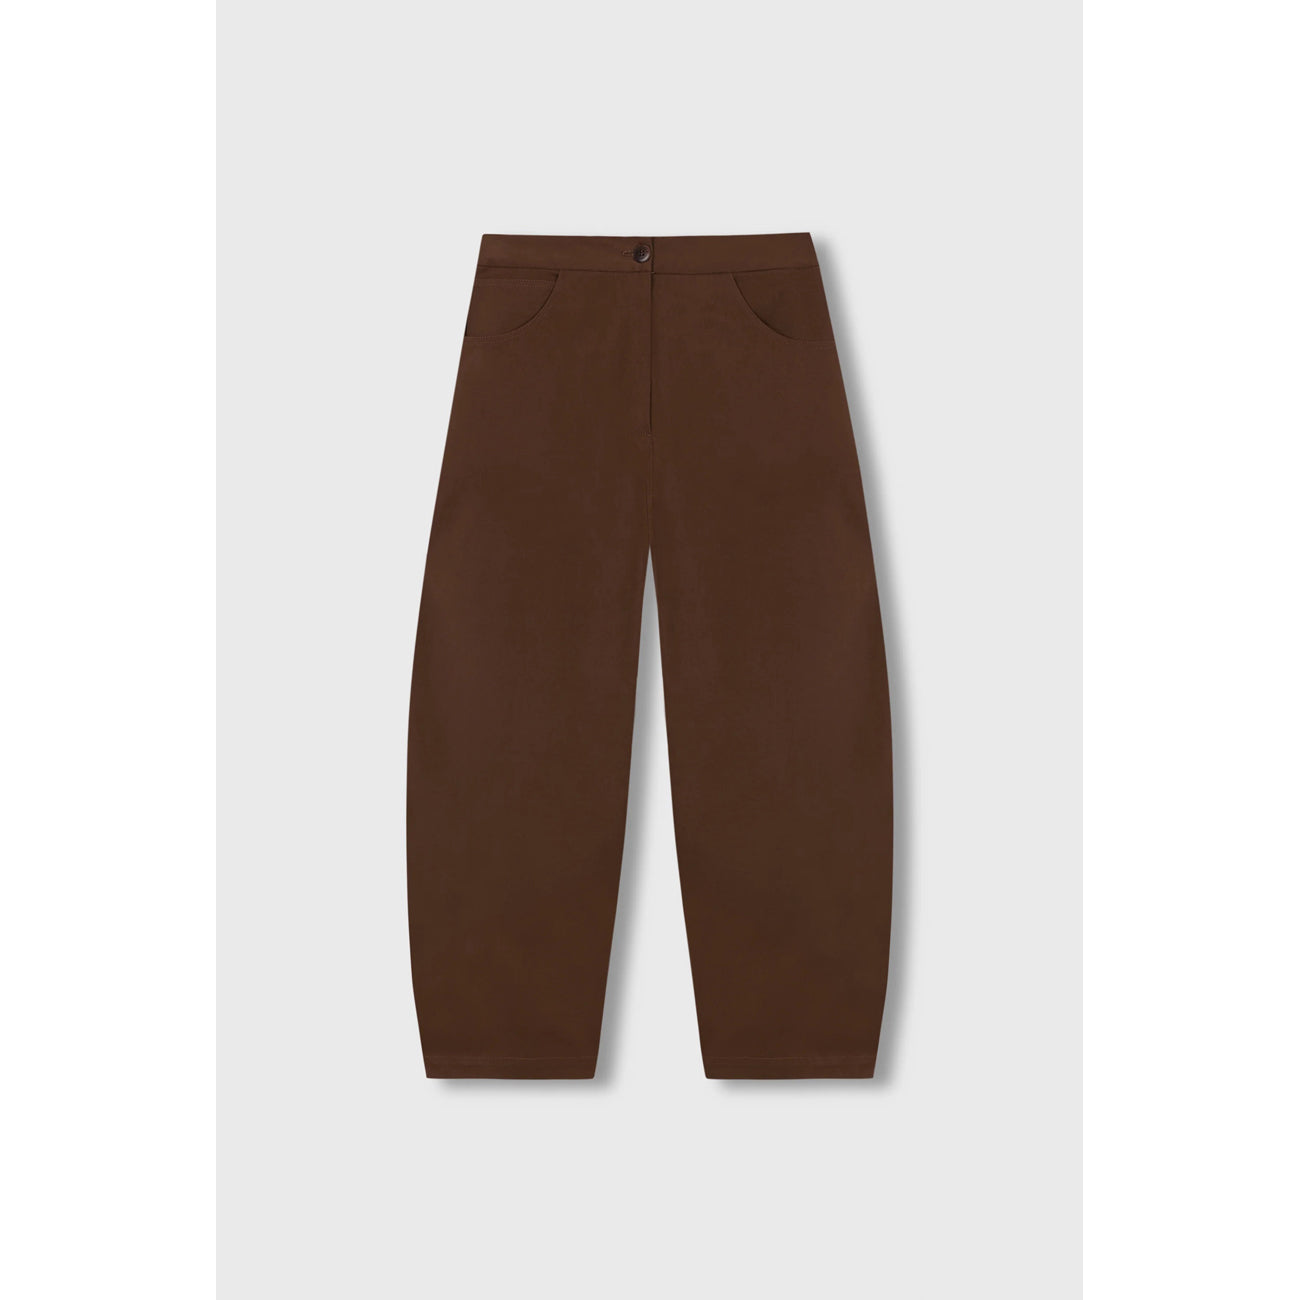 curved pants in toffee